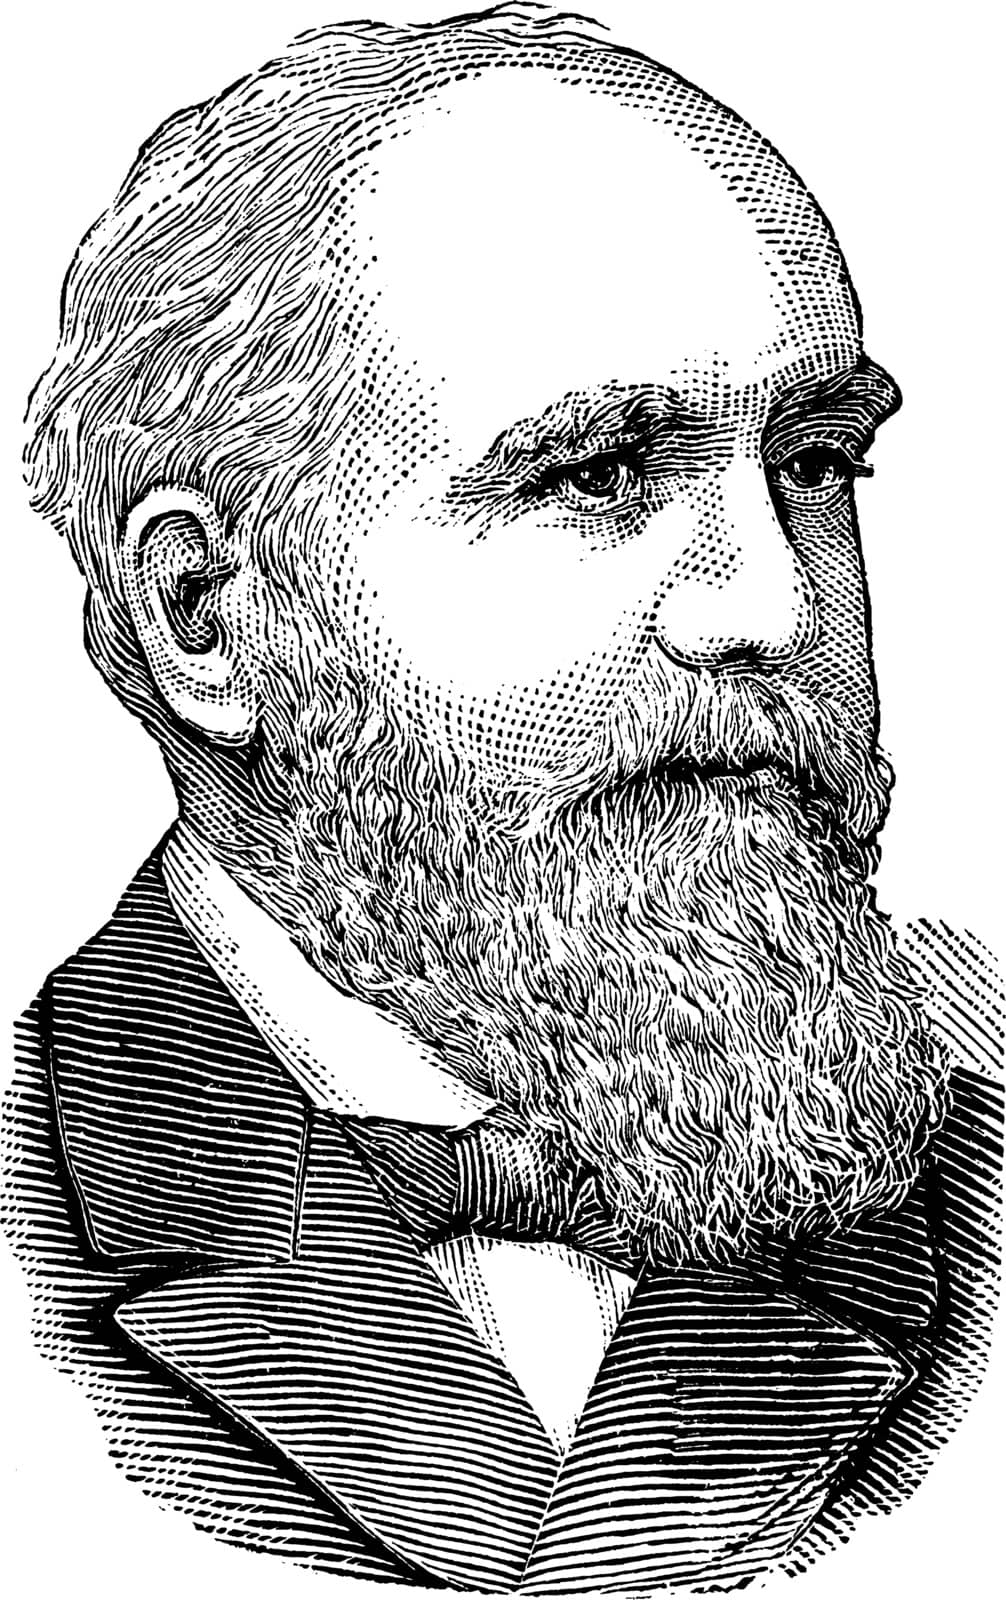 Clinton B. Fisk, 1828-1890, he was a senior officer during reconstruction in the bureau of refugees, freedmen and abandoned lands, vintage line drawing or engraving illustration